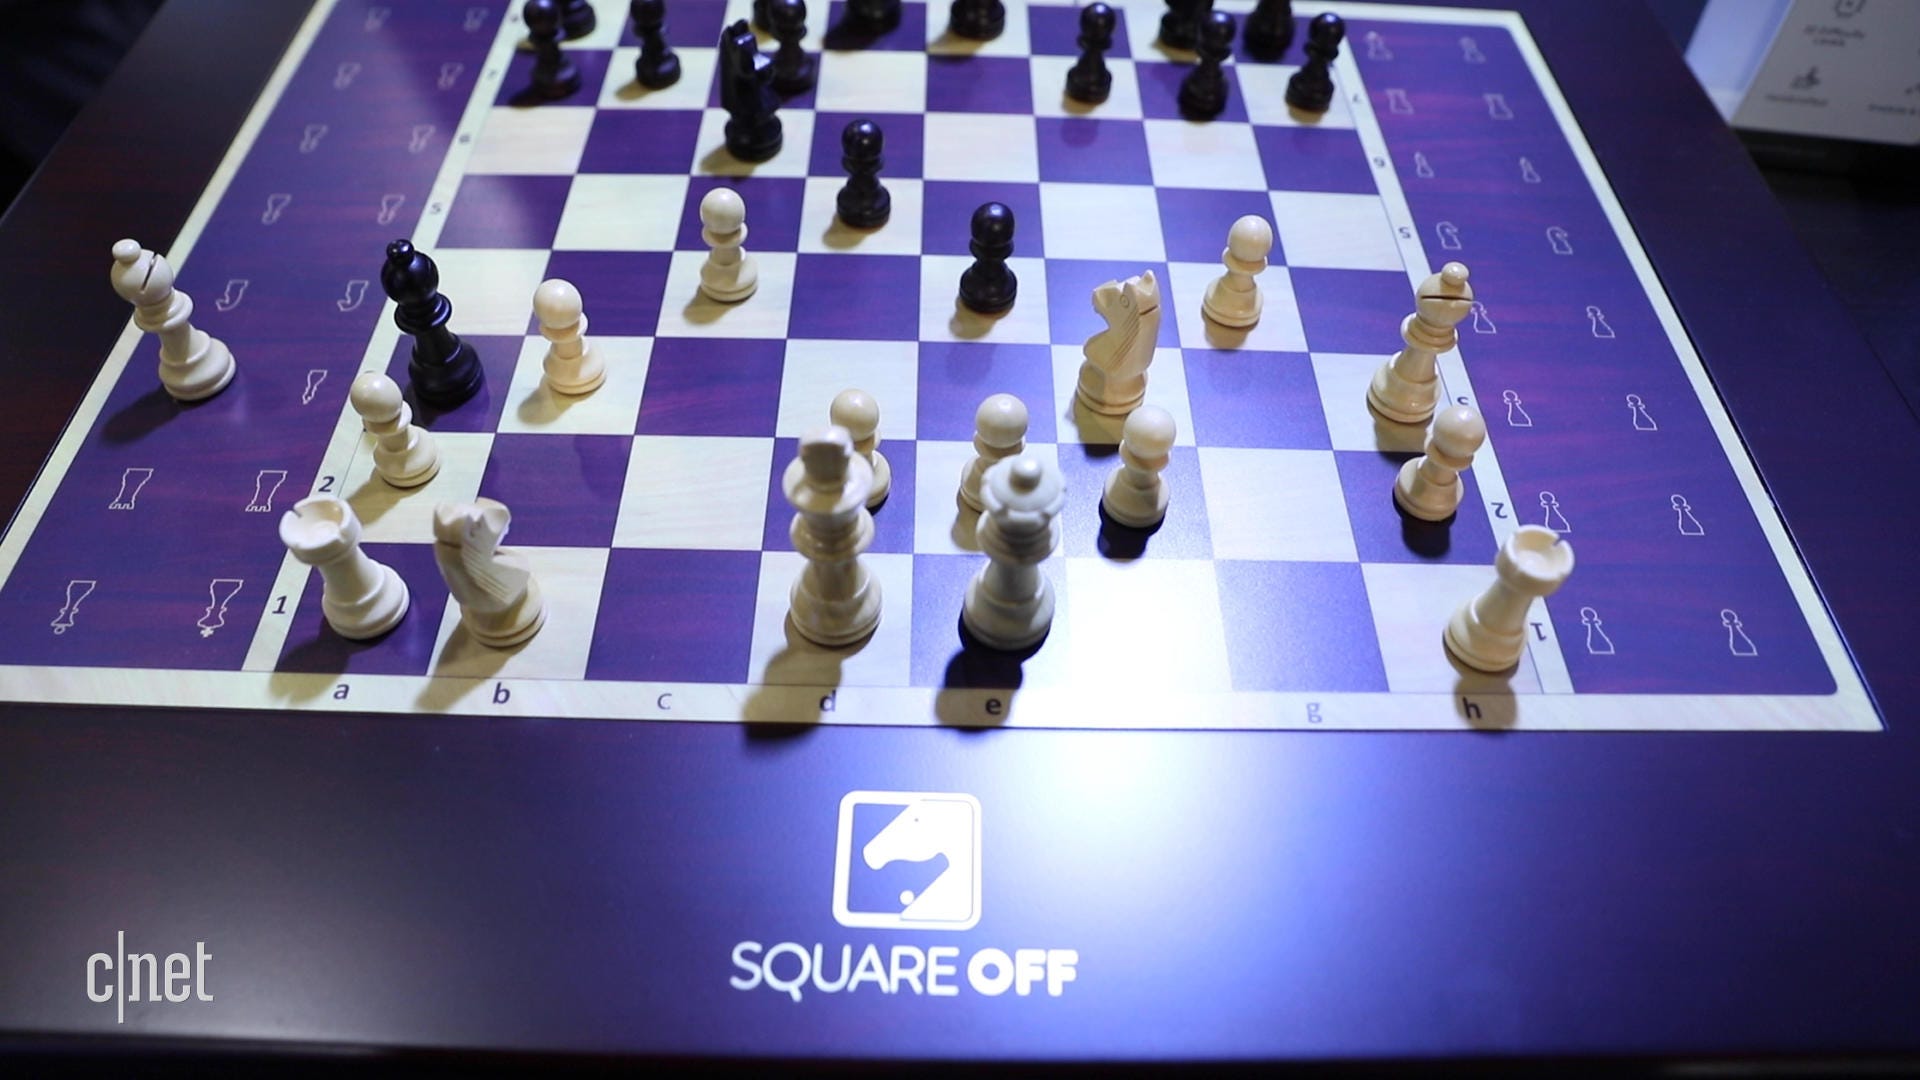 A chess board that can move its own pieces wows at CES 2019 - Video - CNET